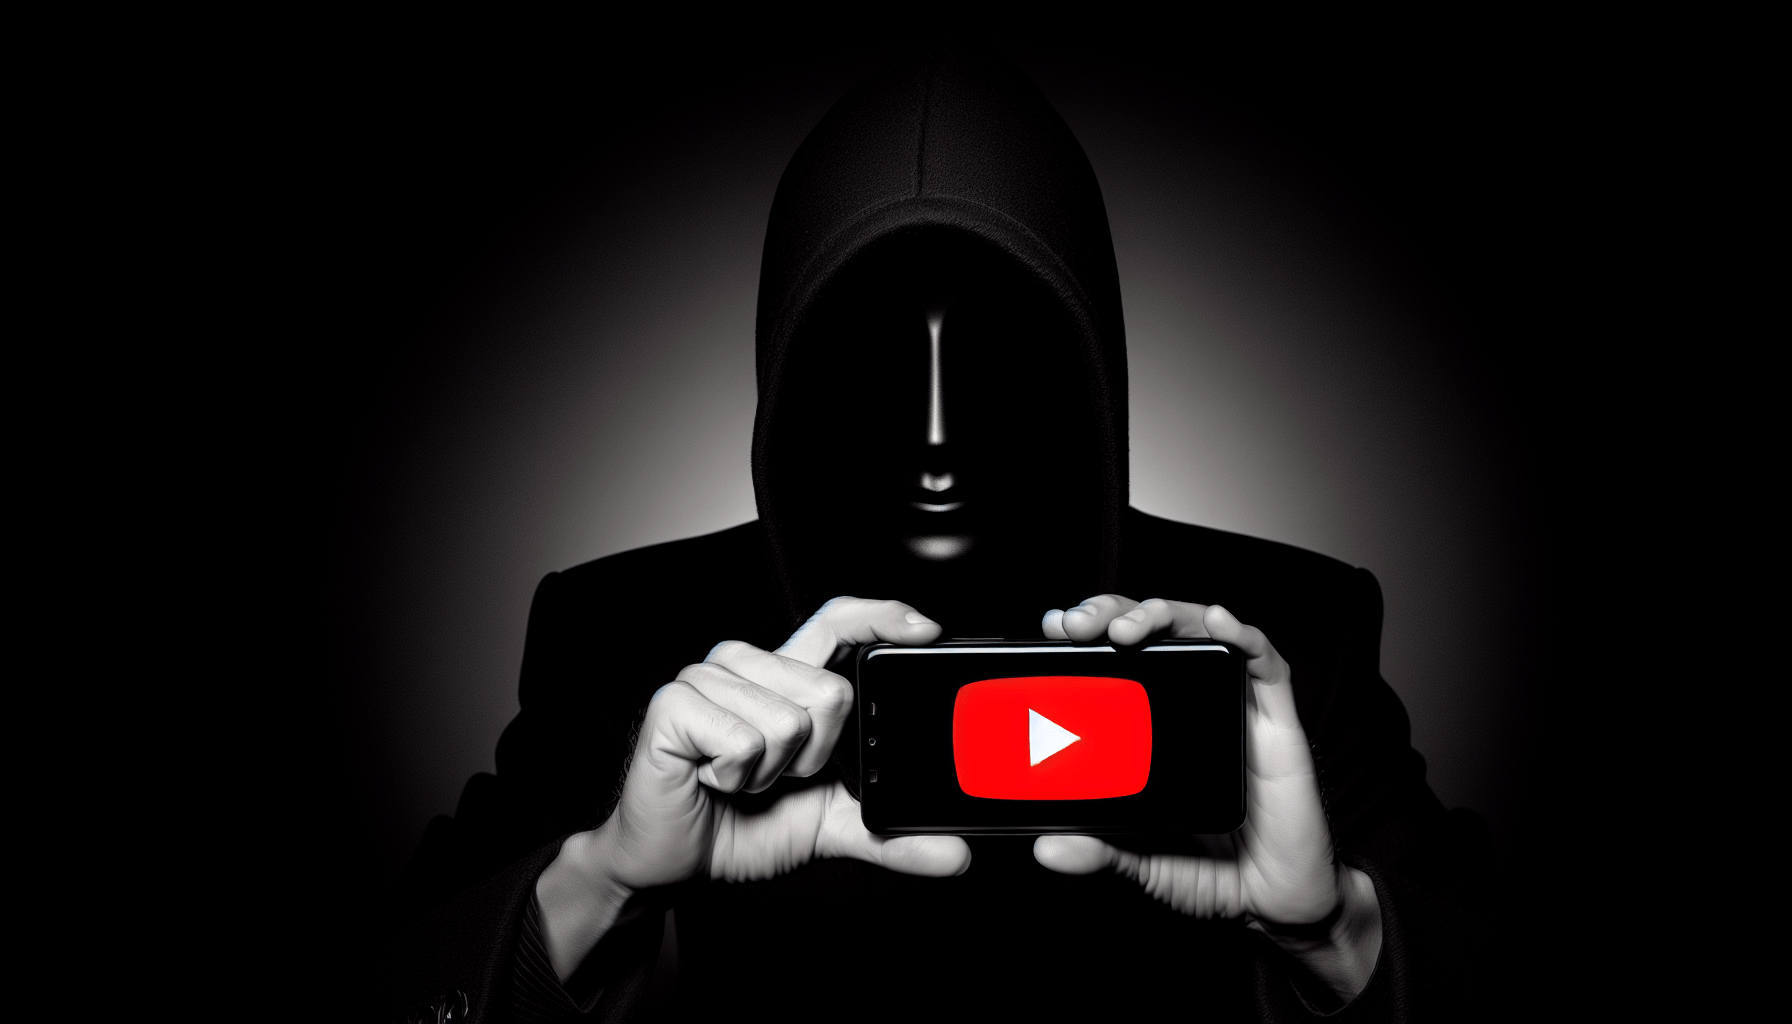 What’s the deal with the elusive Faceless YouTube strategy?